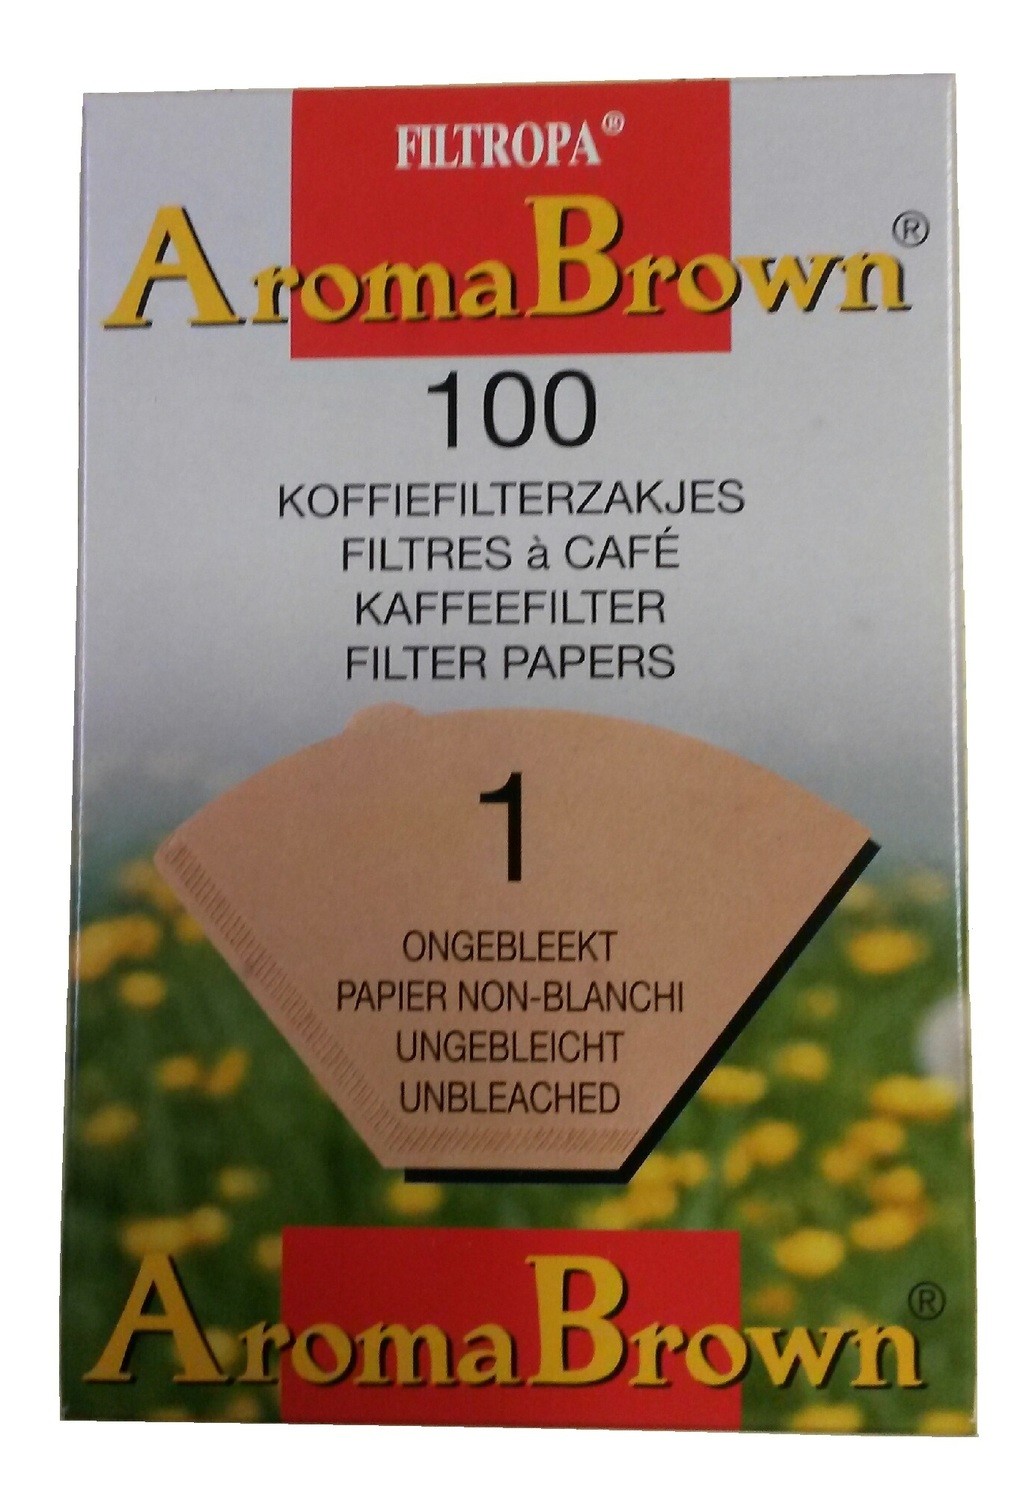 Filtropa Natural Brown Filters, 100 count box (choose size)